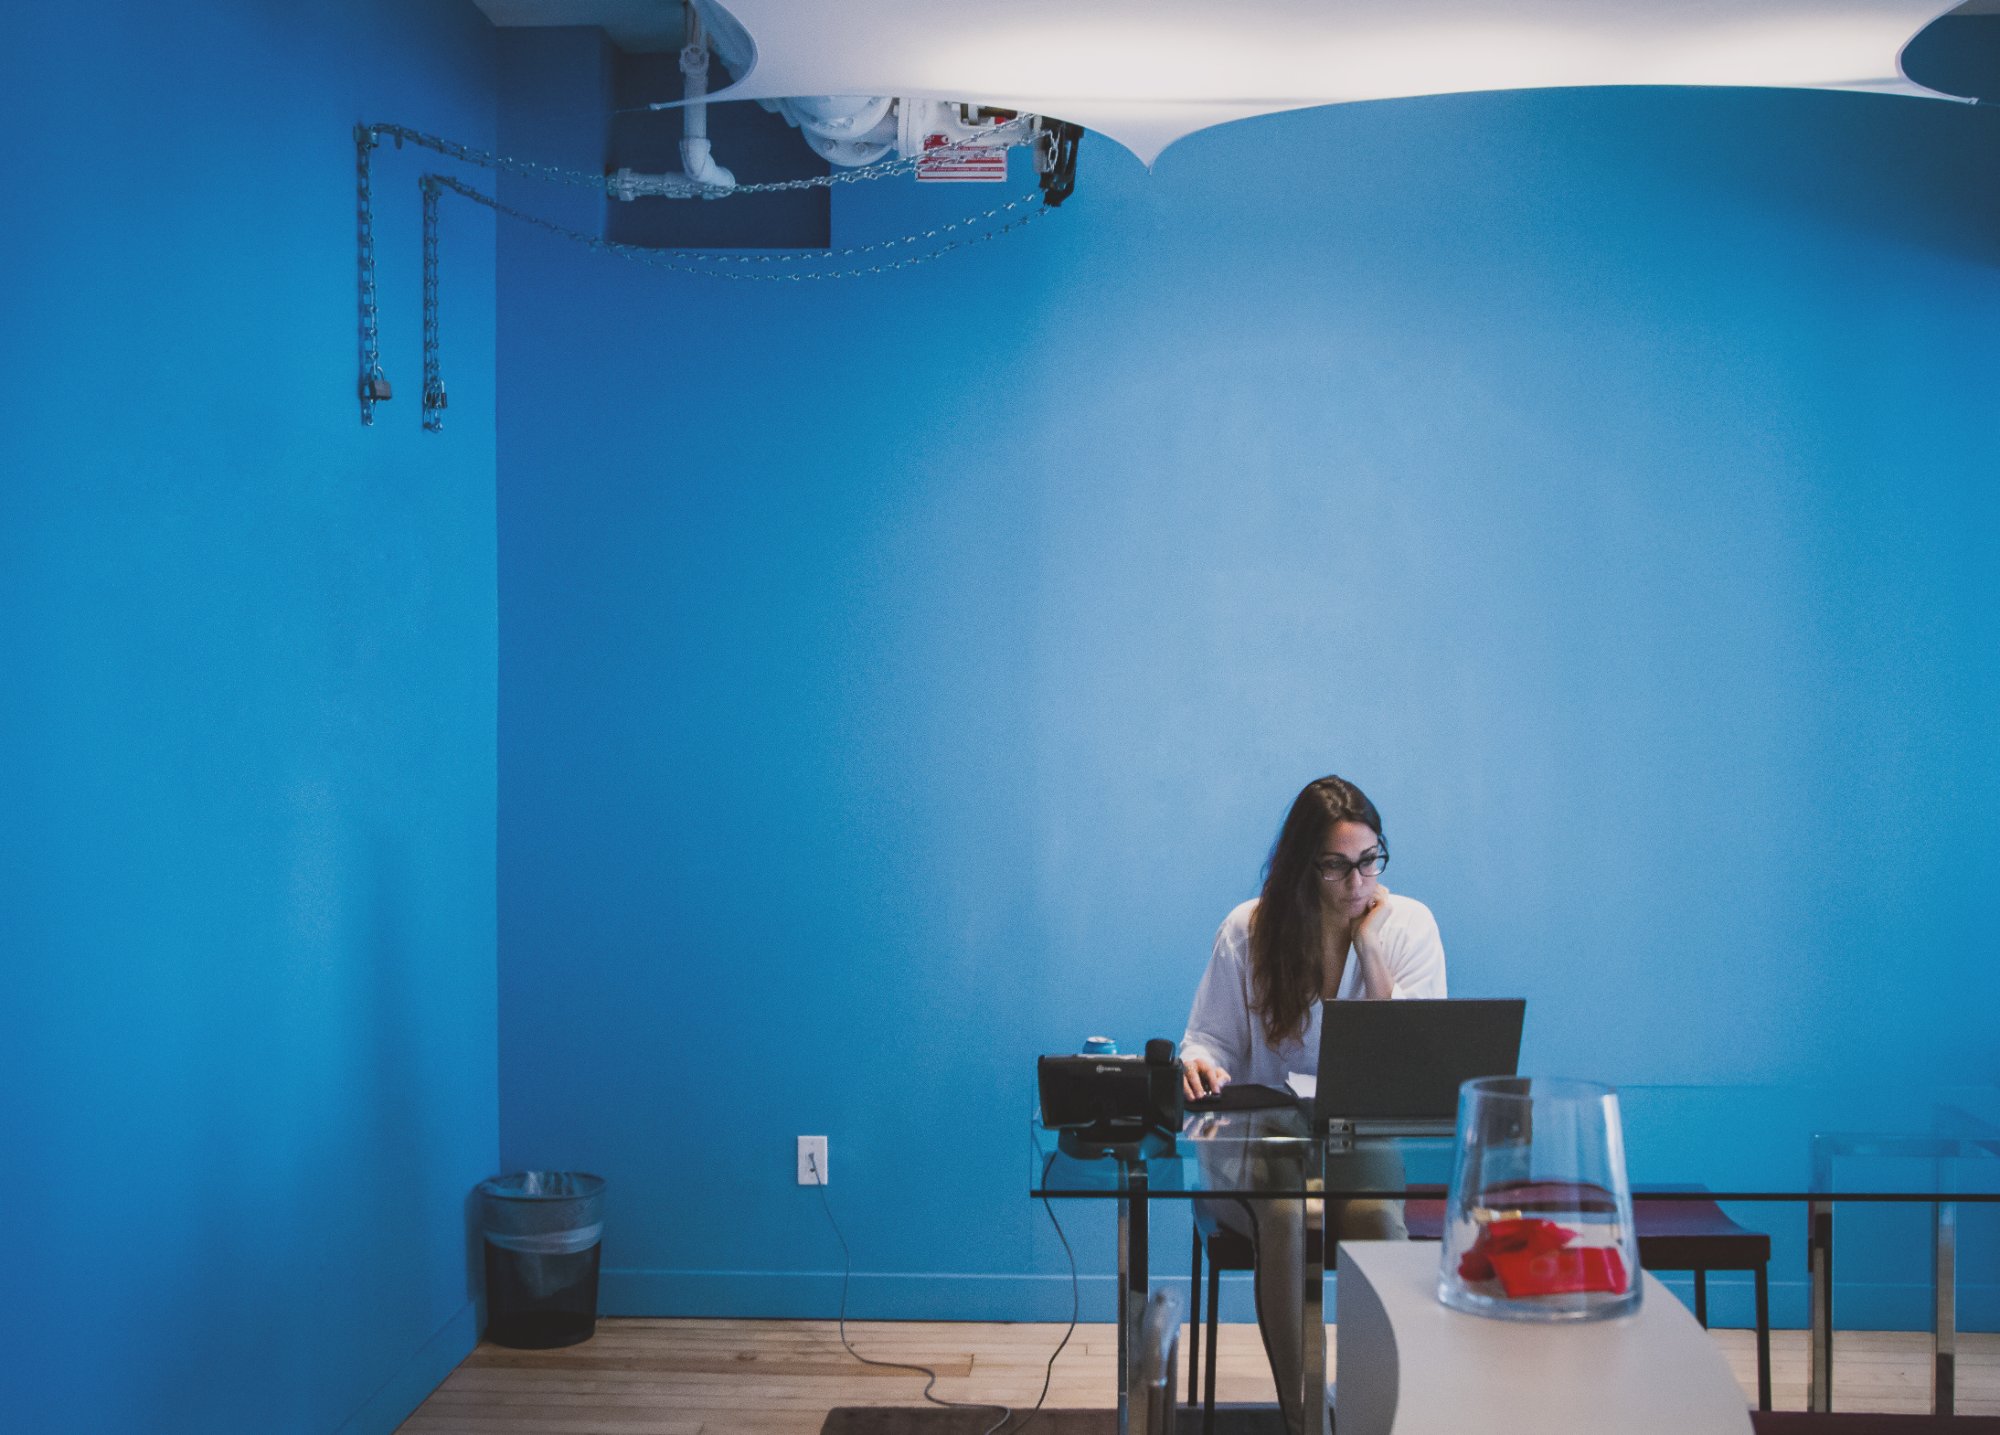 Woman working on a laptop placed on a desk, in a room whose walls are painted blue